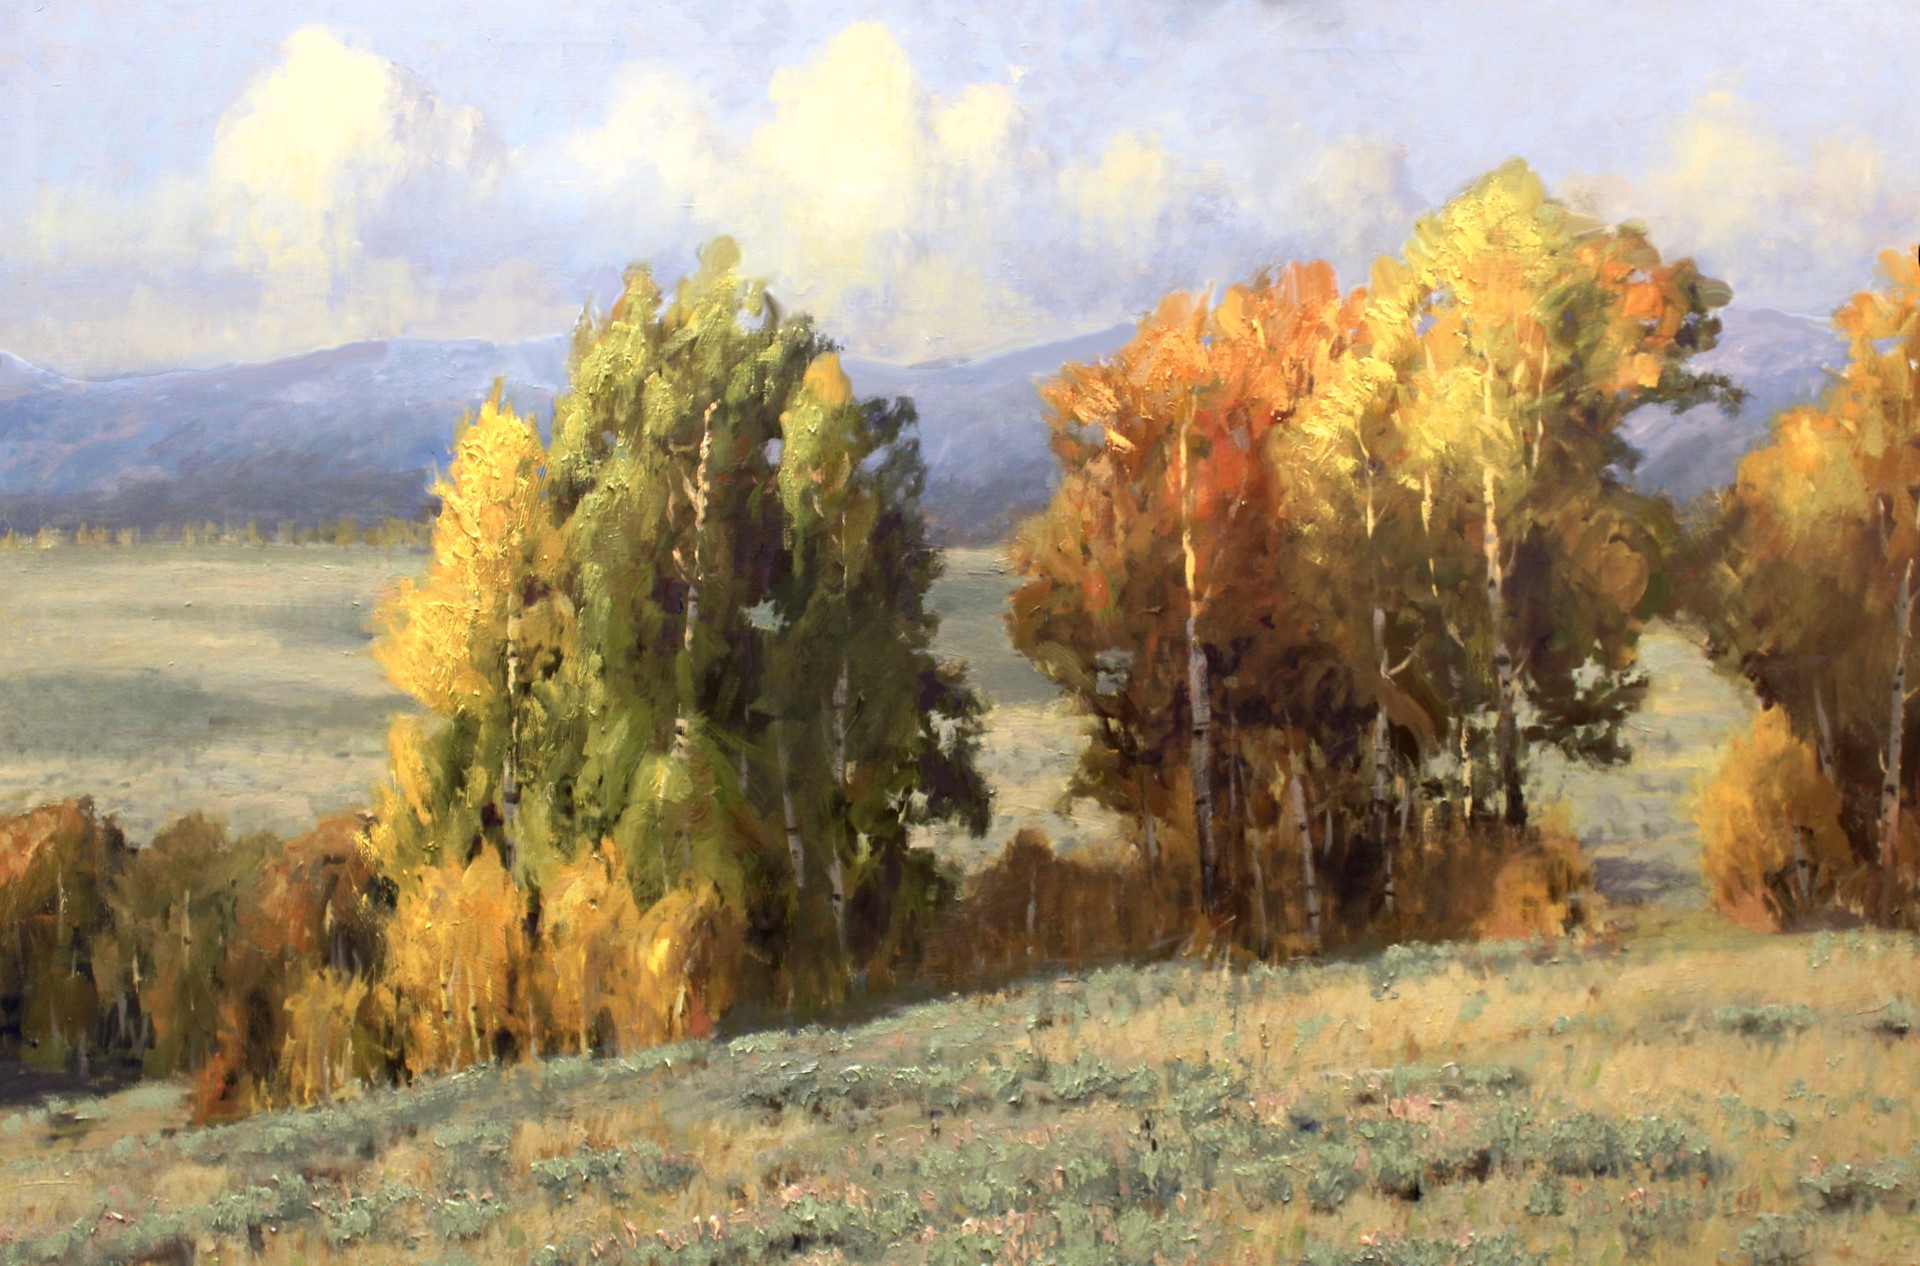 Roger Dale Brown, OPAM "Autumn Splendor" by Oil Painters of America